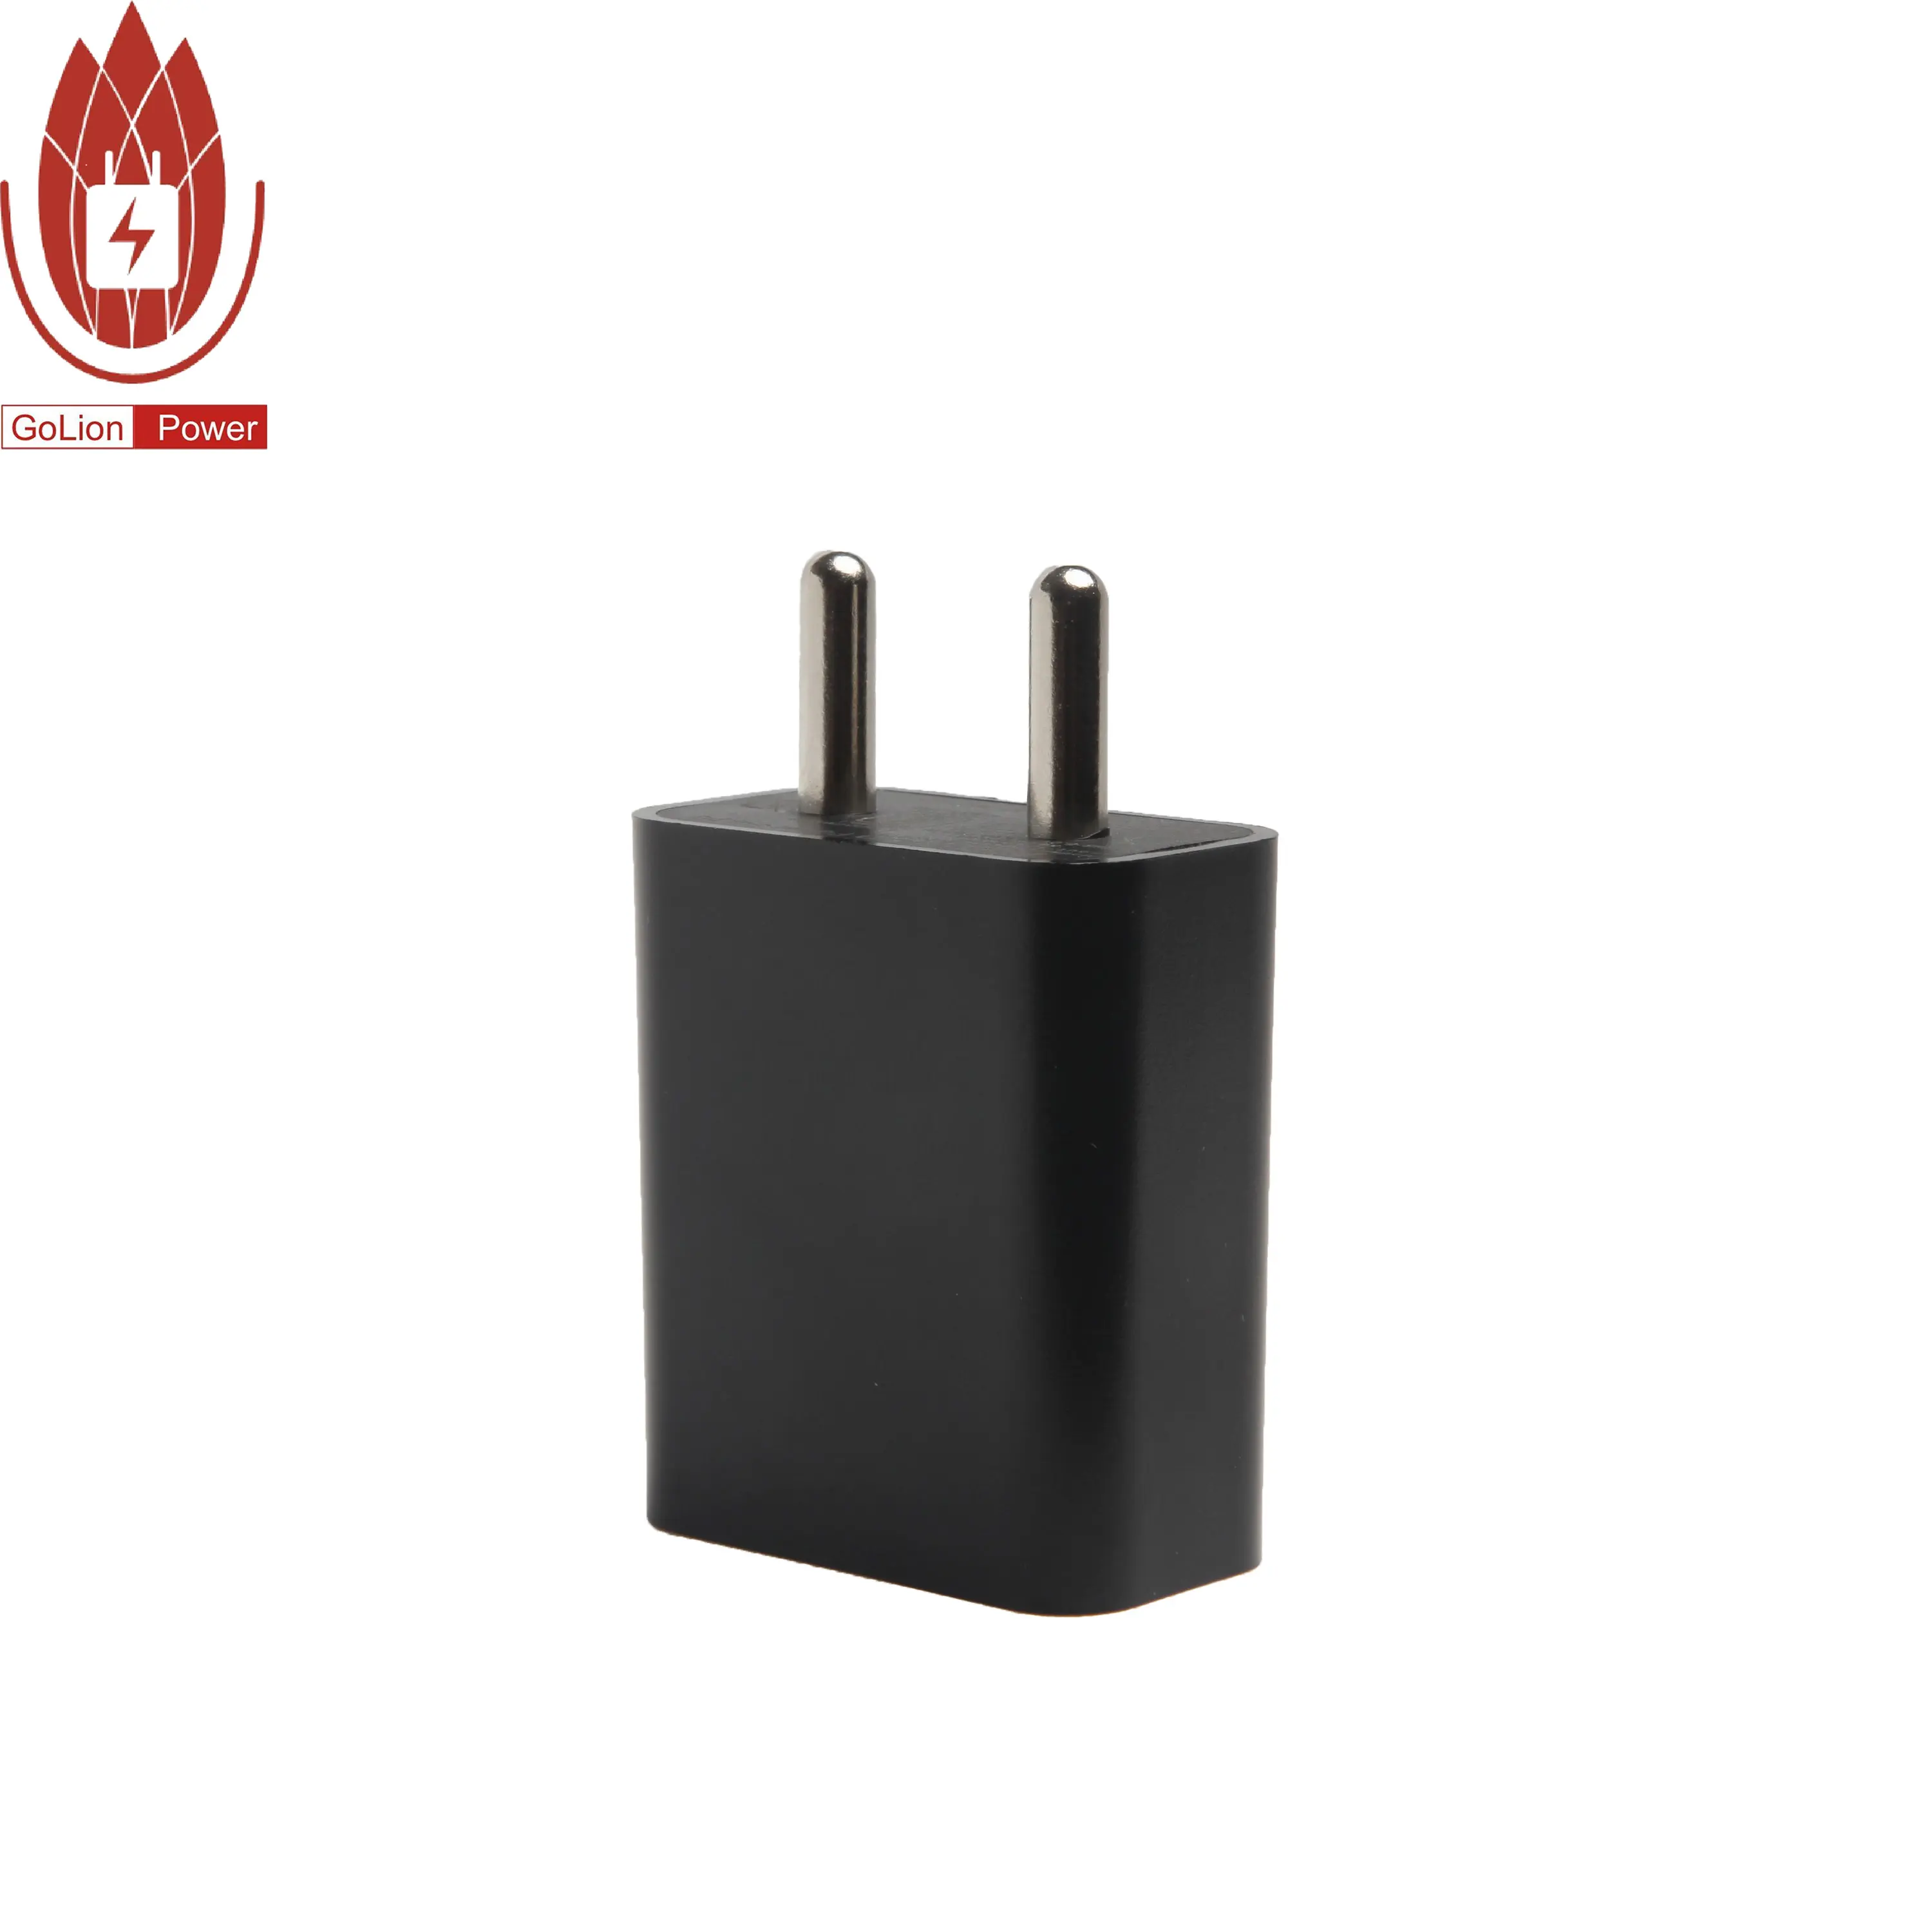 China manufacturer 5v2a wall 1a usb charger Indian plug 5V 2A with BIS certification